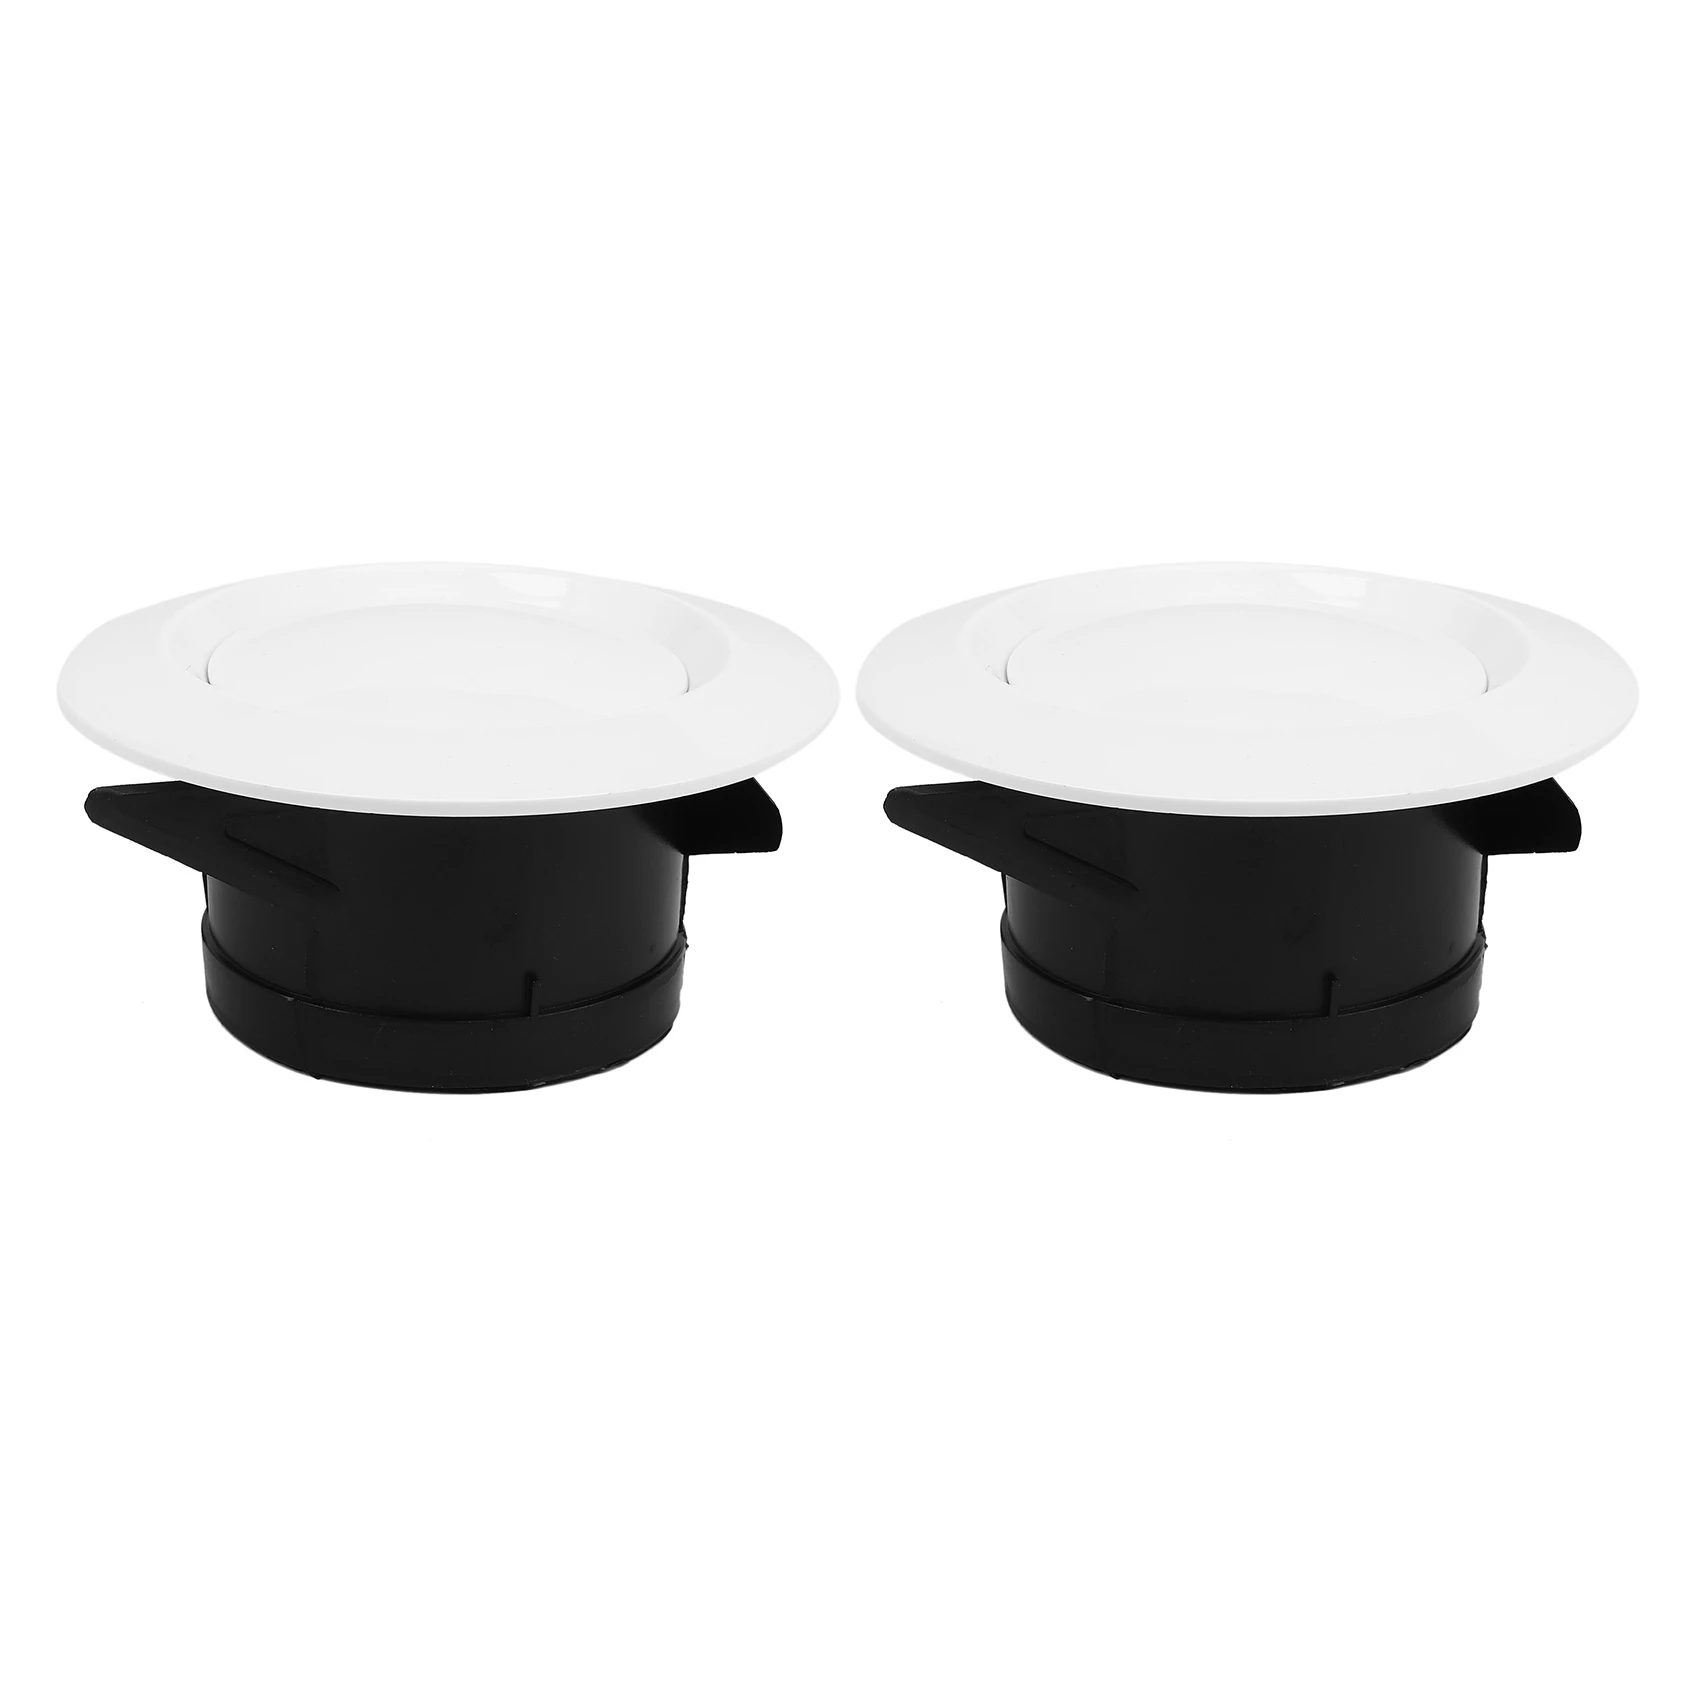 

2 Pieces ABS Adjustable Air Vent Round Soffit Exhaust Vent White Inline Duct Fan Outlet Vent 4 Inch